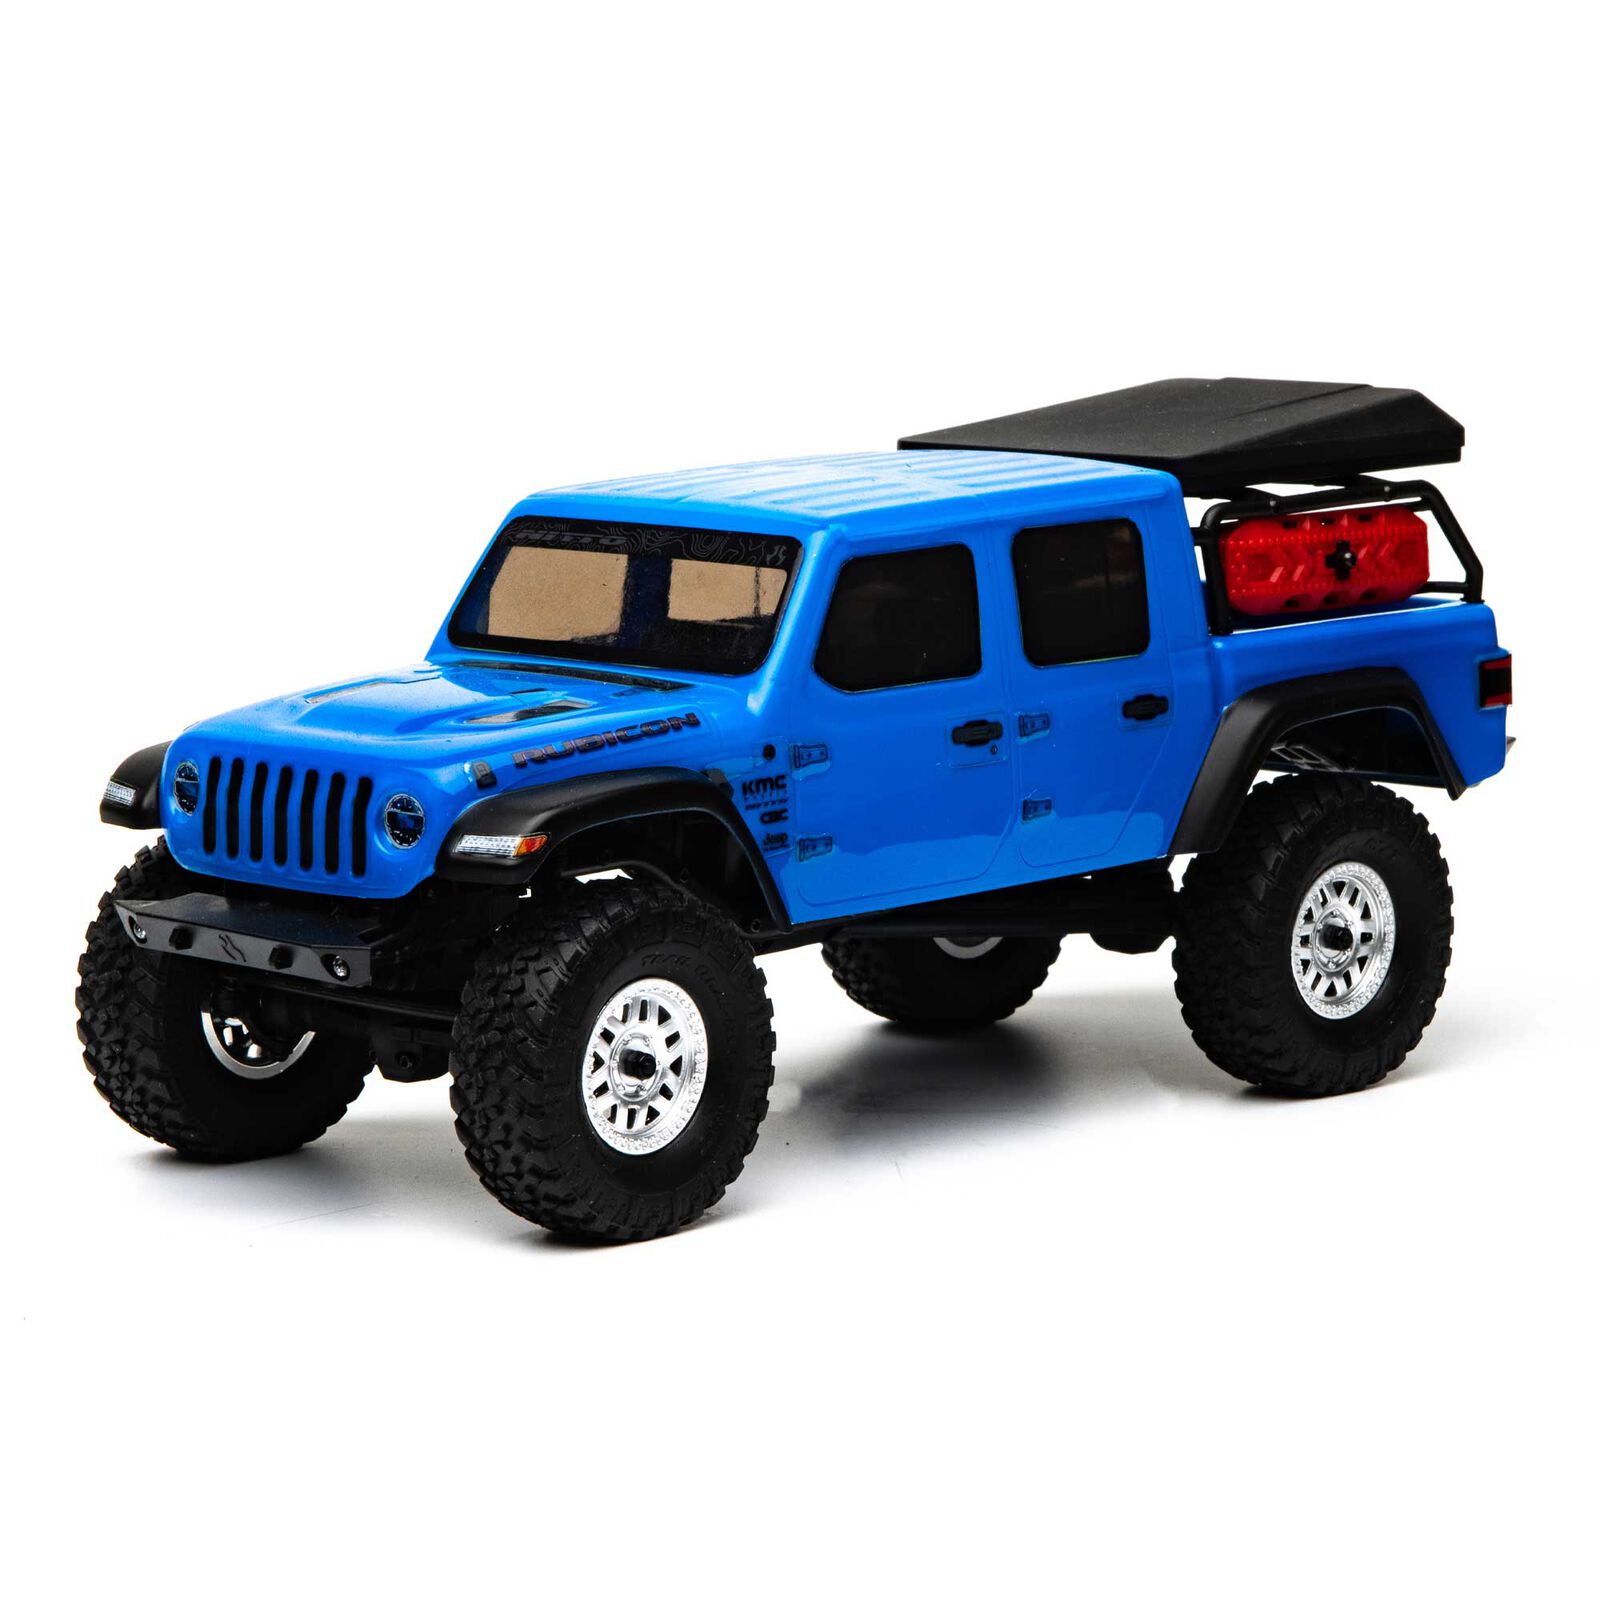 RC Crawler & Scale Cars at Modellsport Schweighofer - Order Online Now